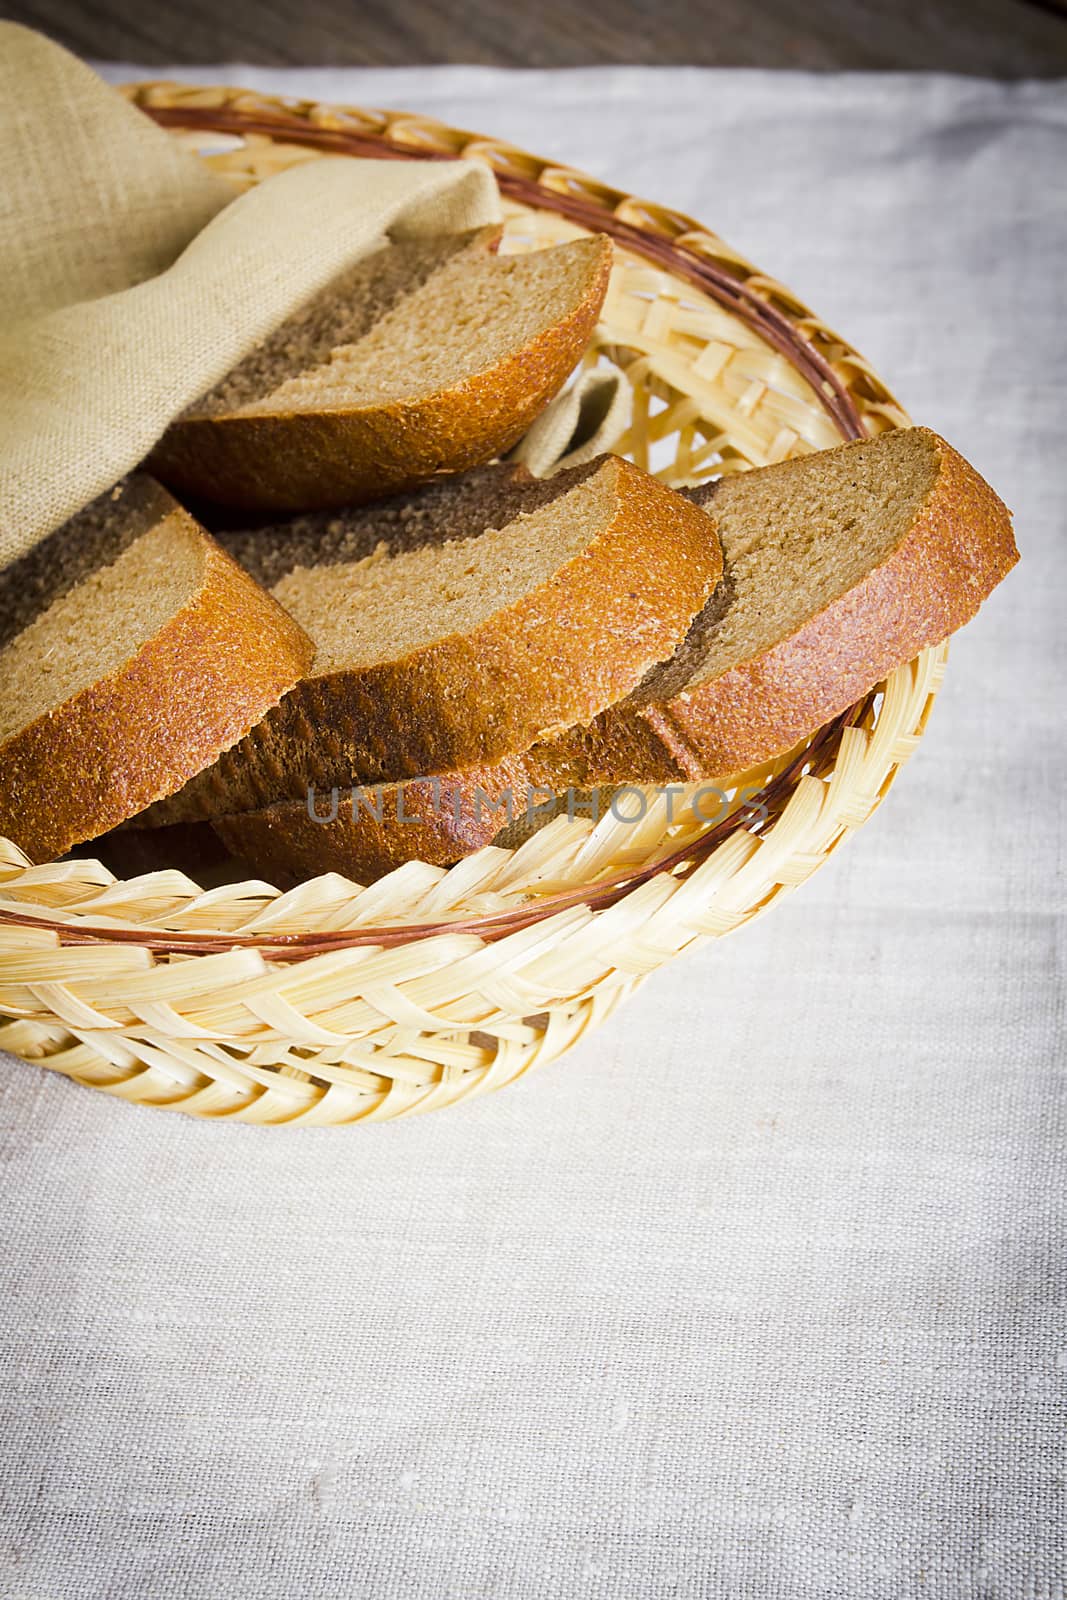 Sliced bread in a basket on a table covered with a linen tablecloth